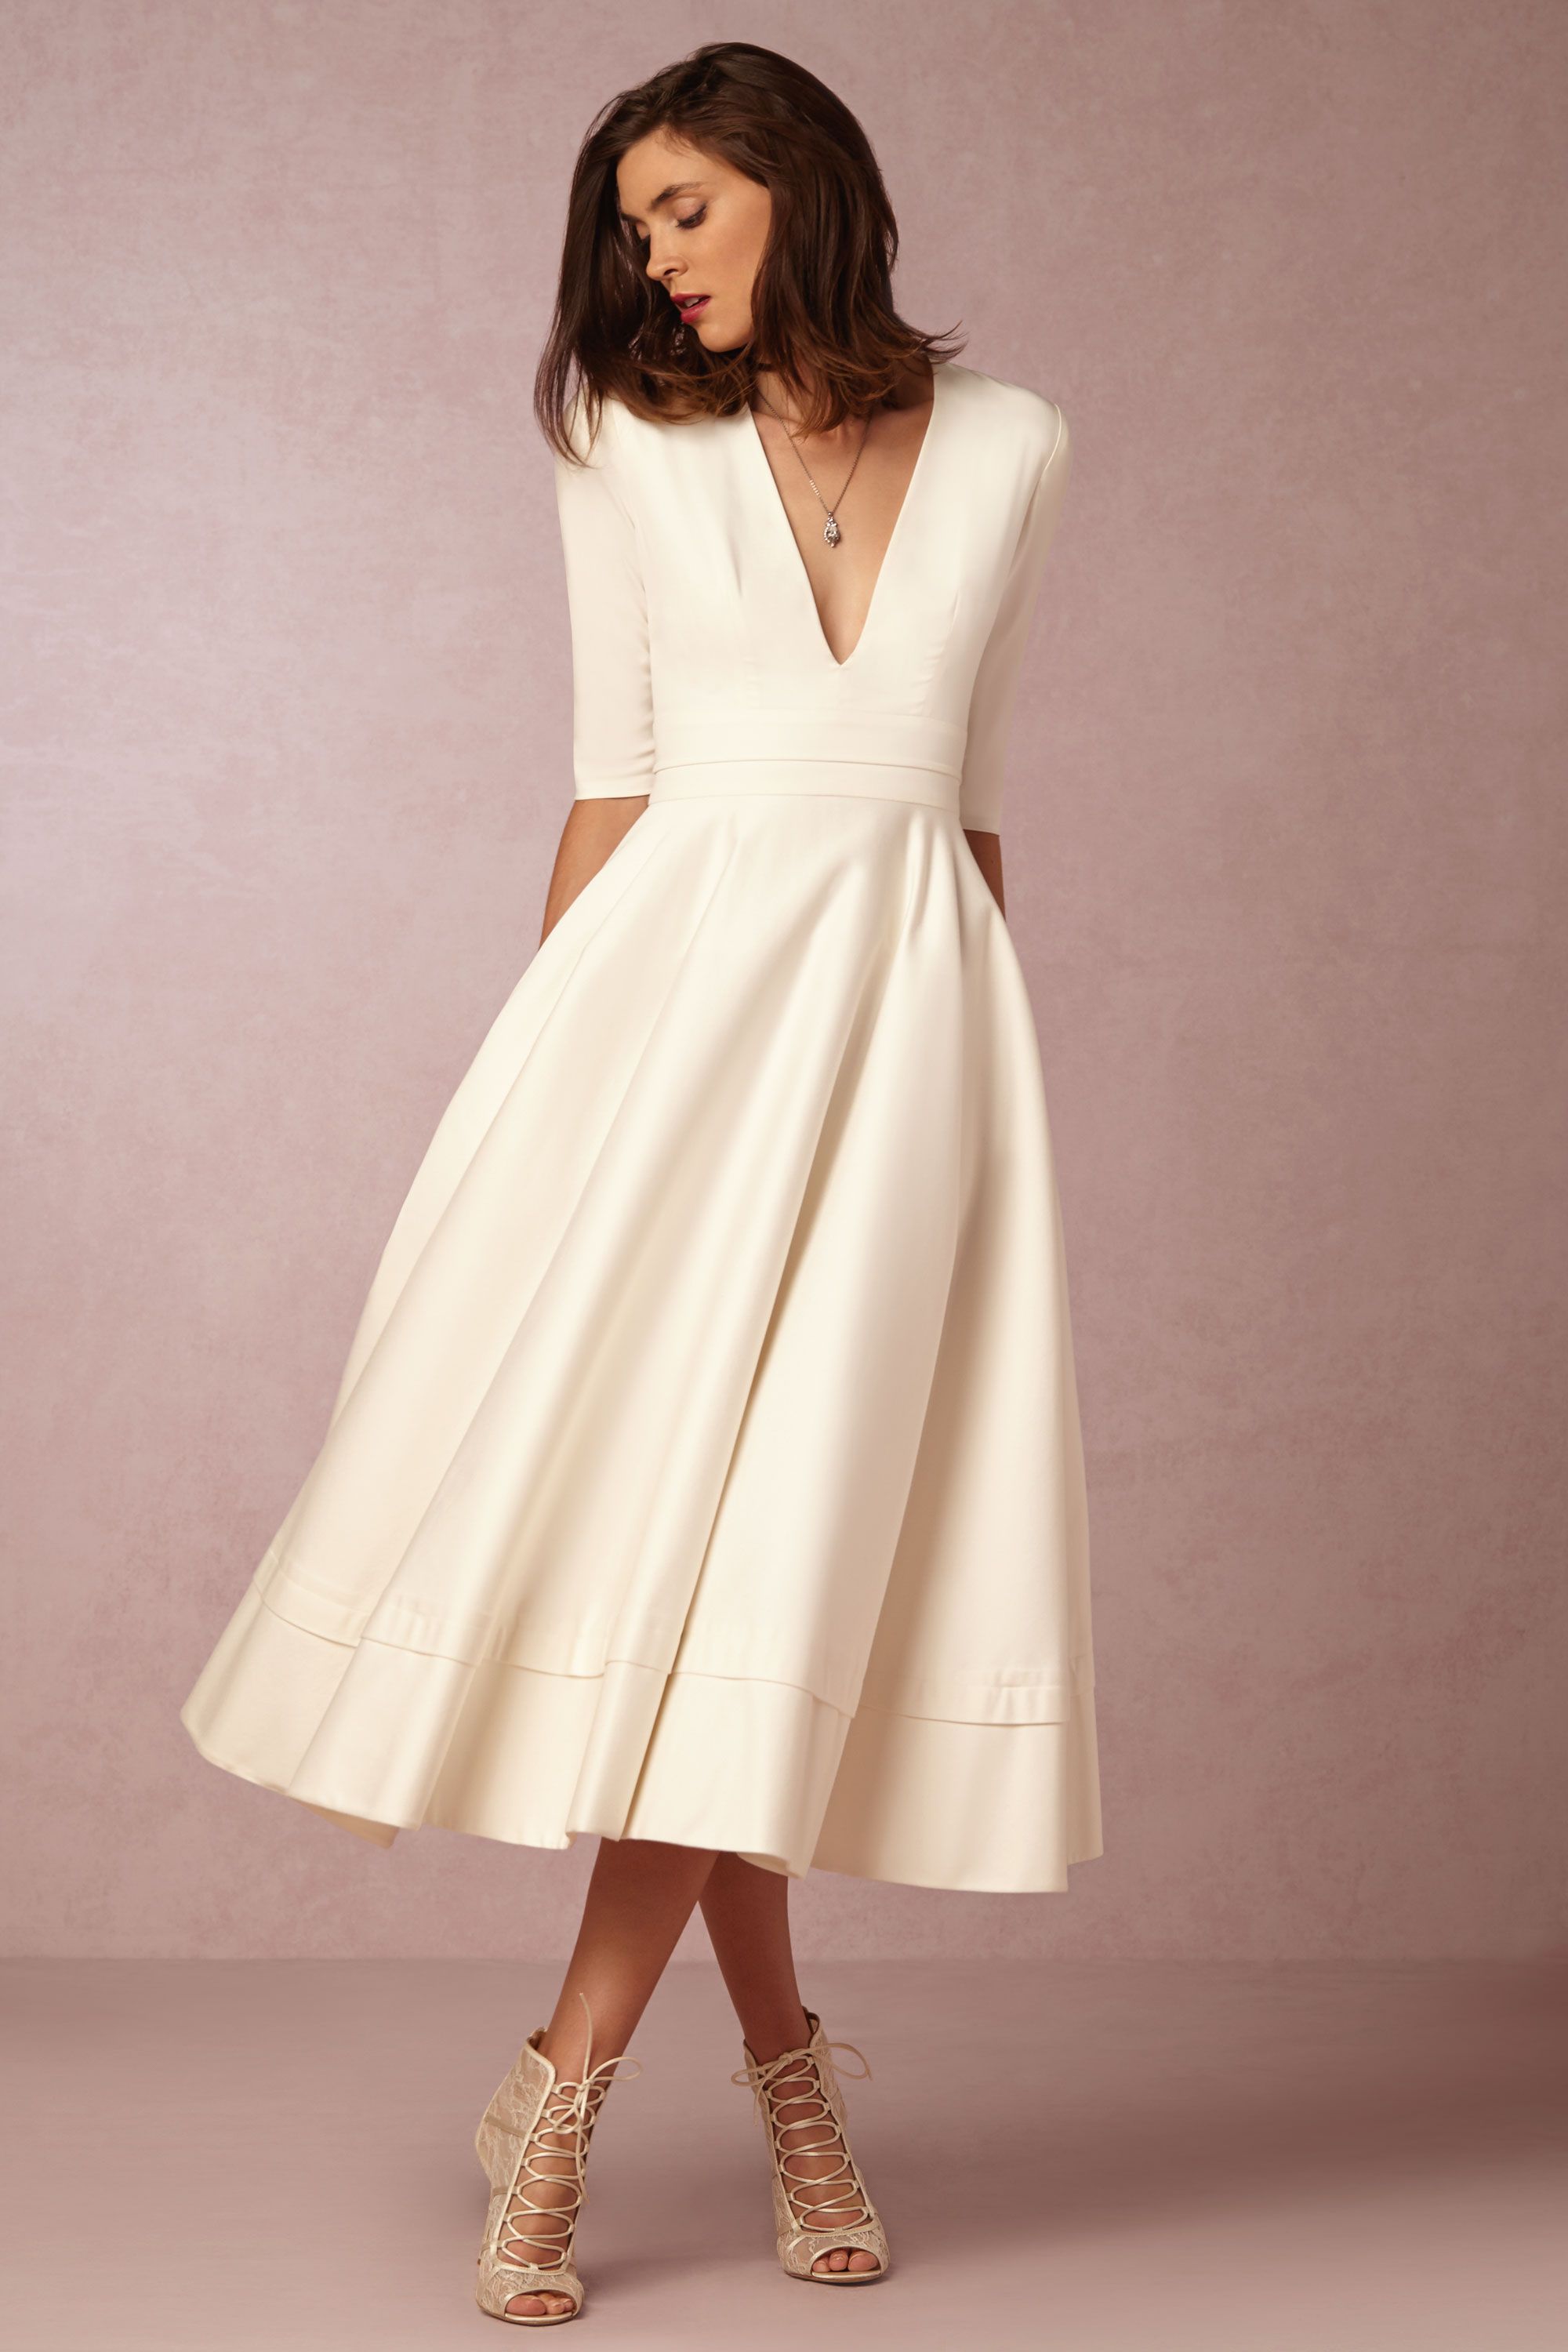 Fall bridesmaid dresses with sleeves